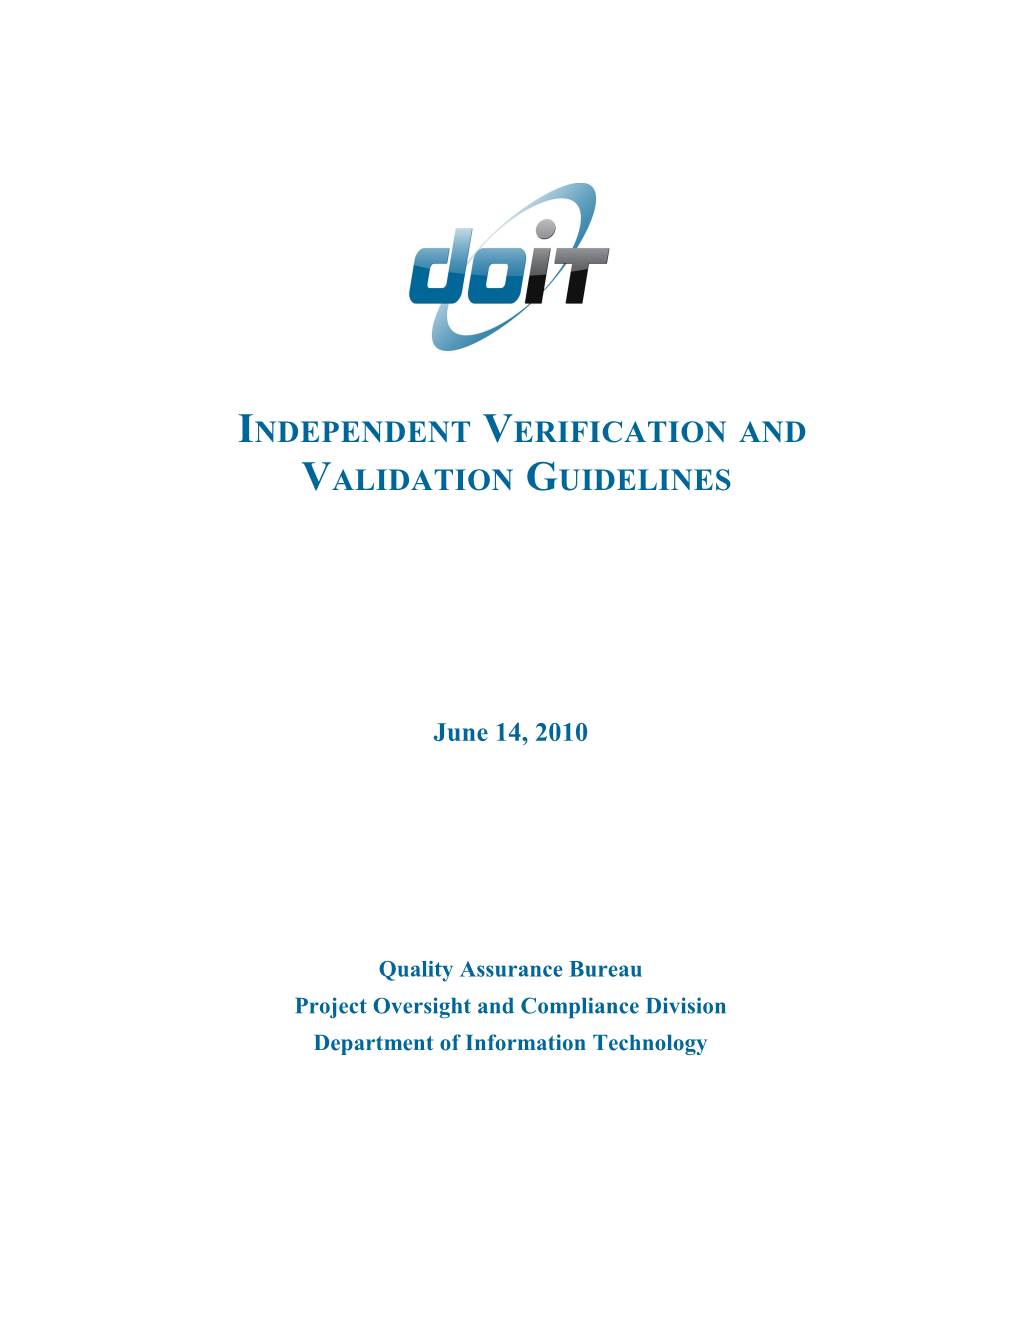 Independent Verification and Validation Guidelines